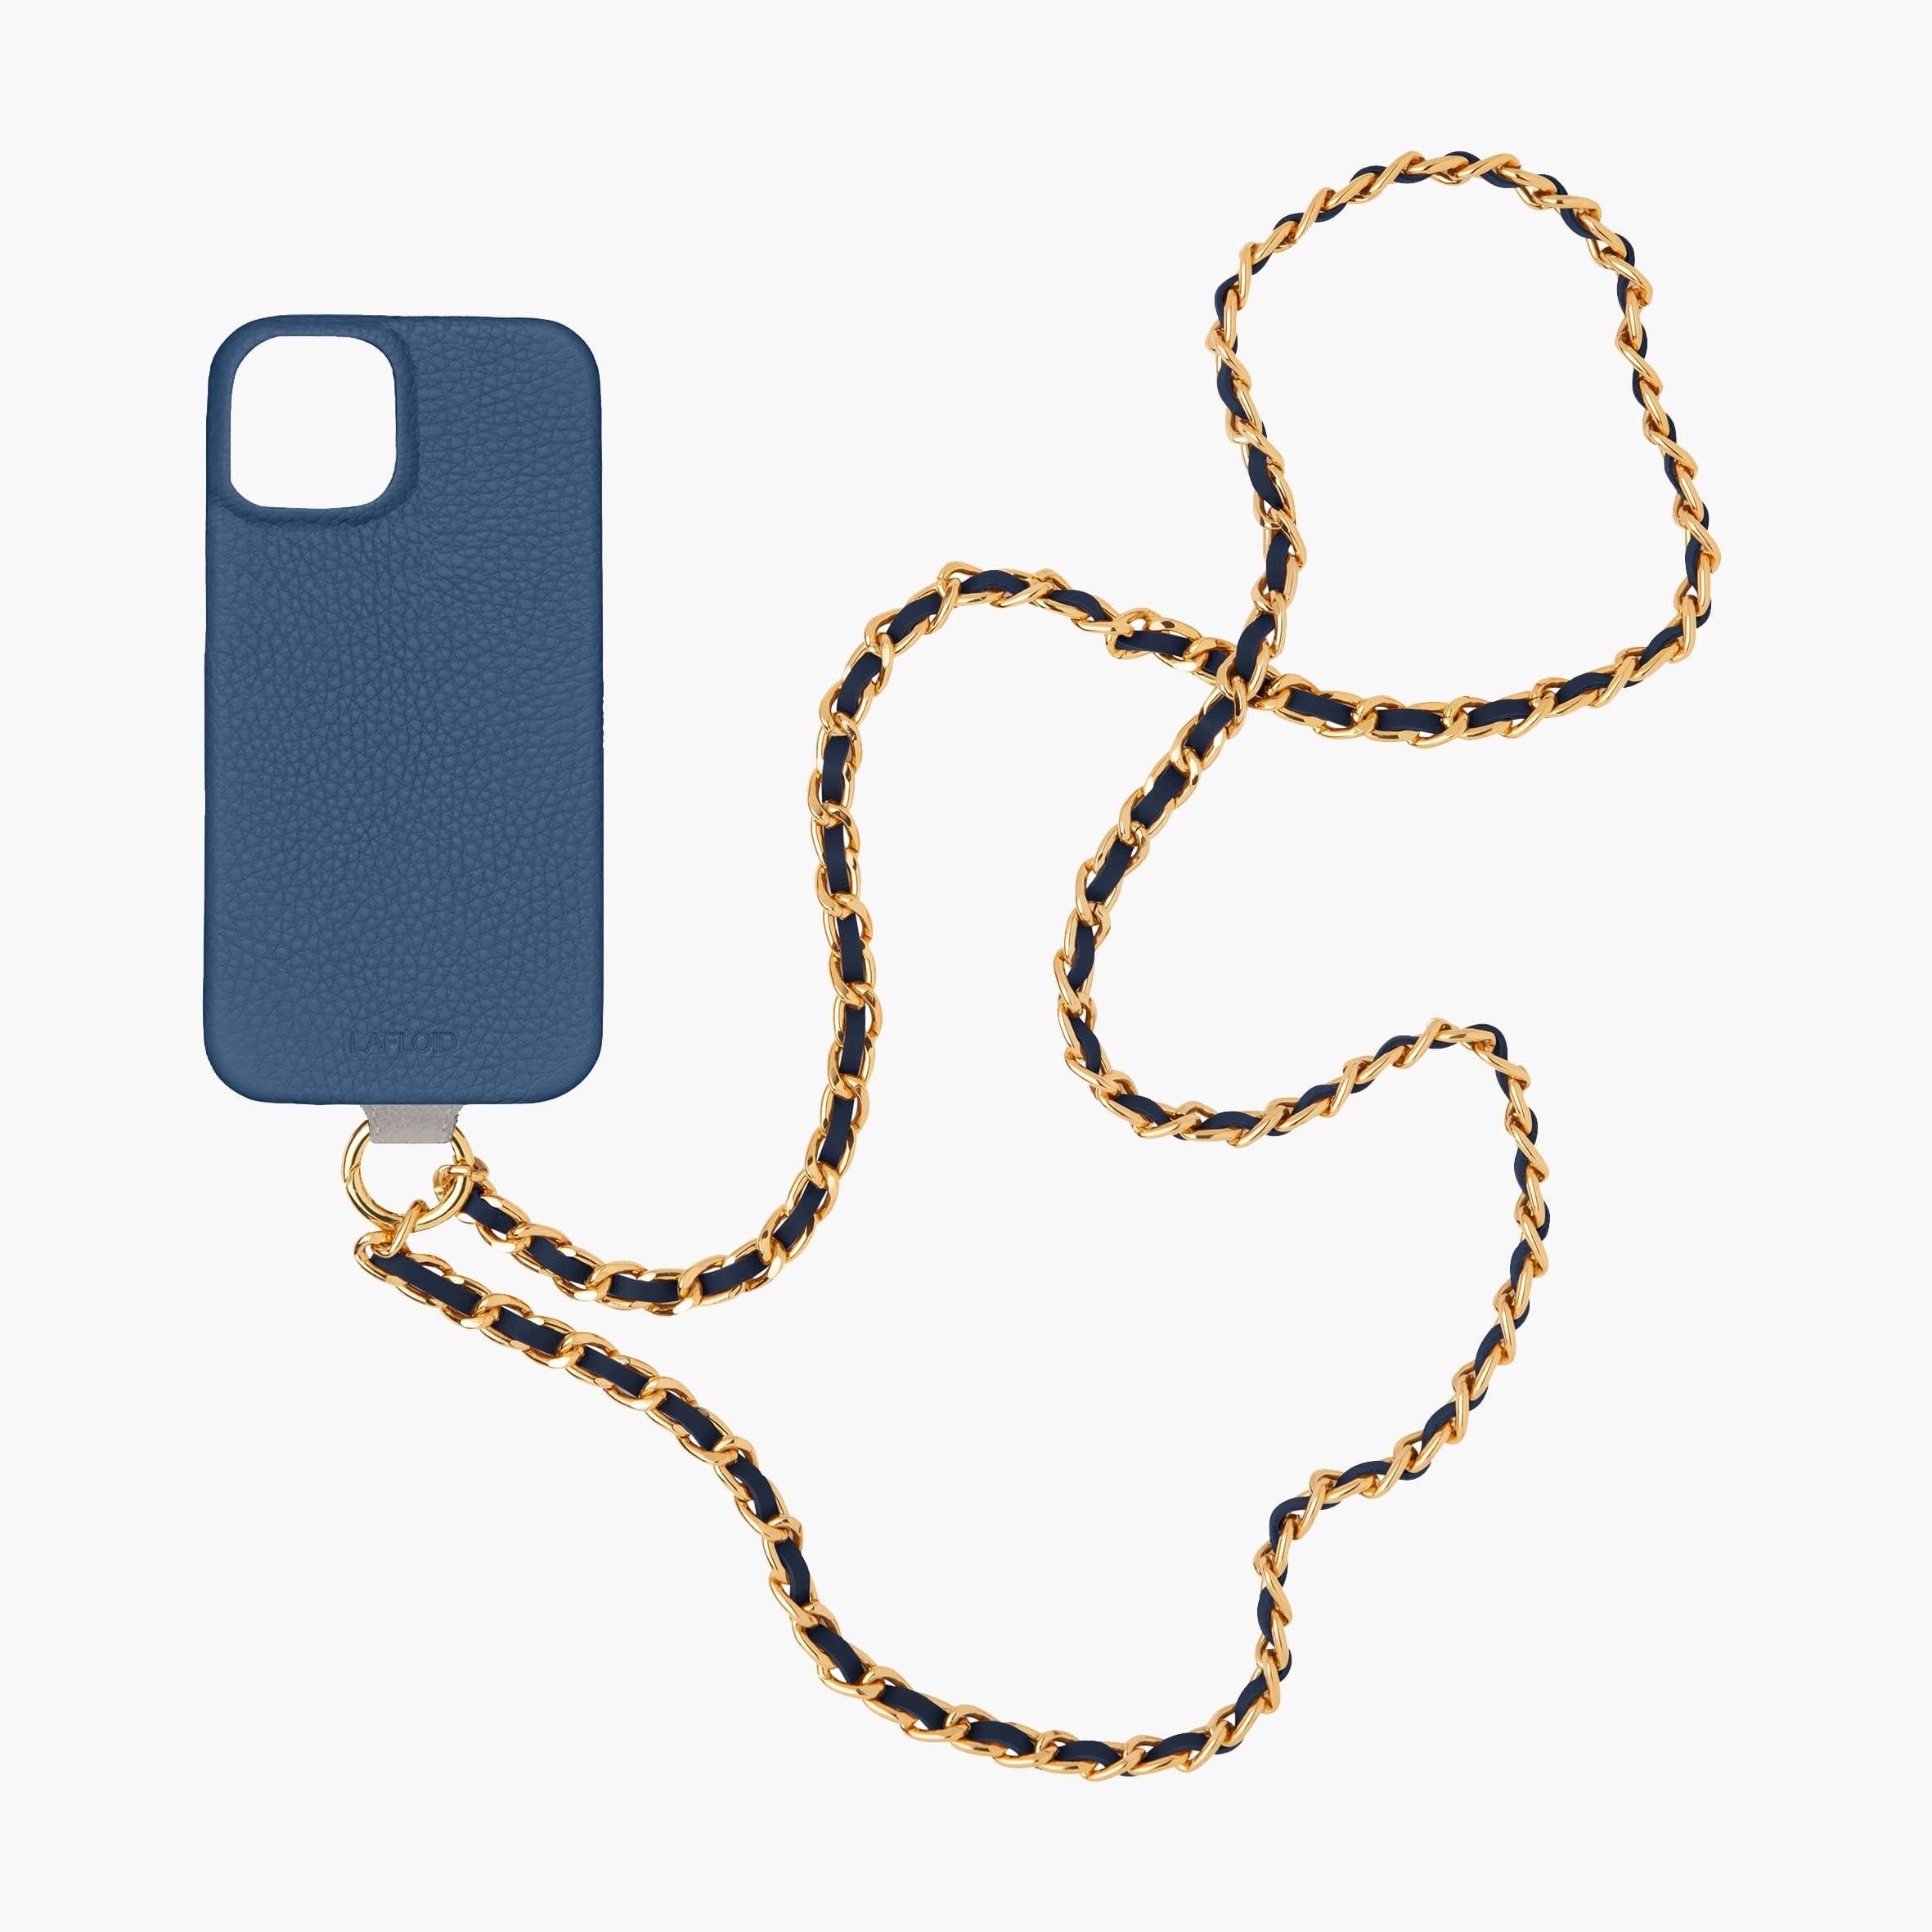 iPhone 12 PRO MAX Strap Case Pack + Chain Strap